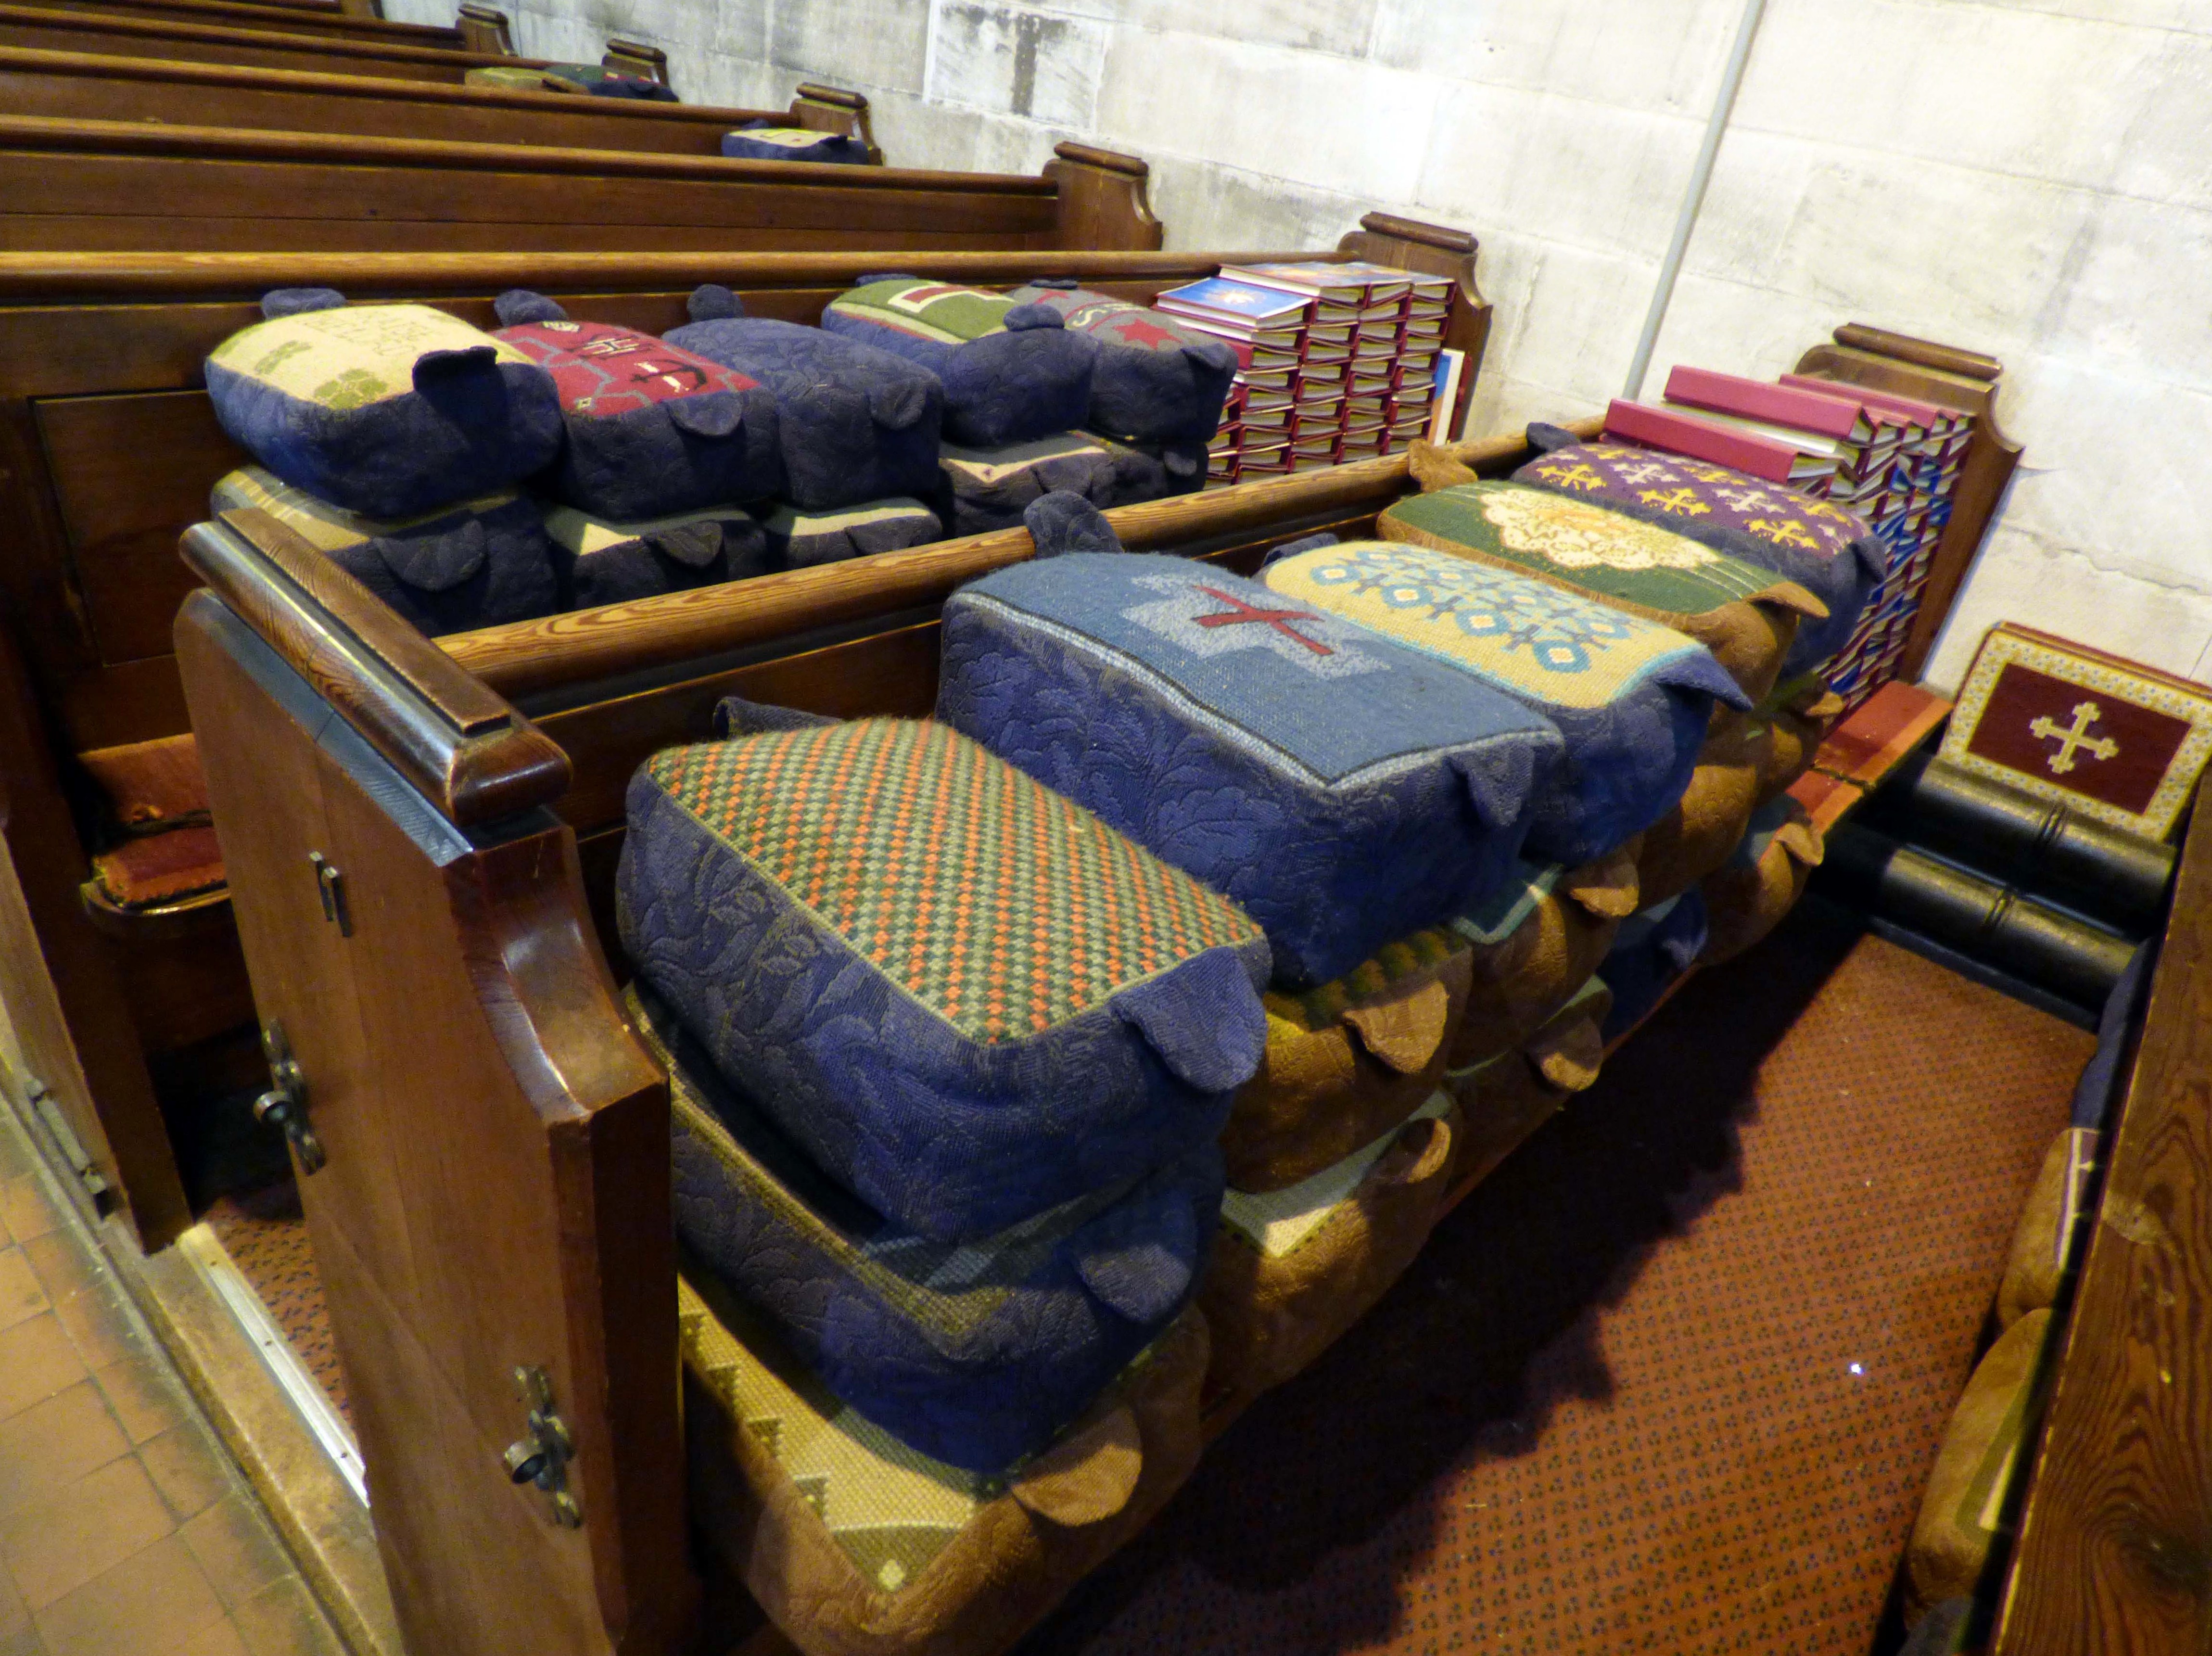 embroidered kneelers in All Hallows Church, Liverpool, Feb 2022